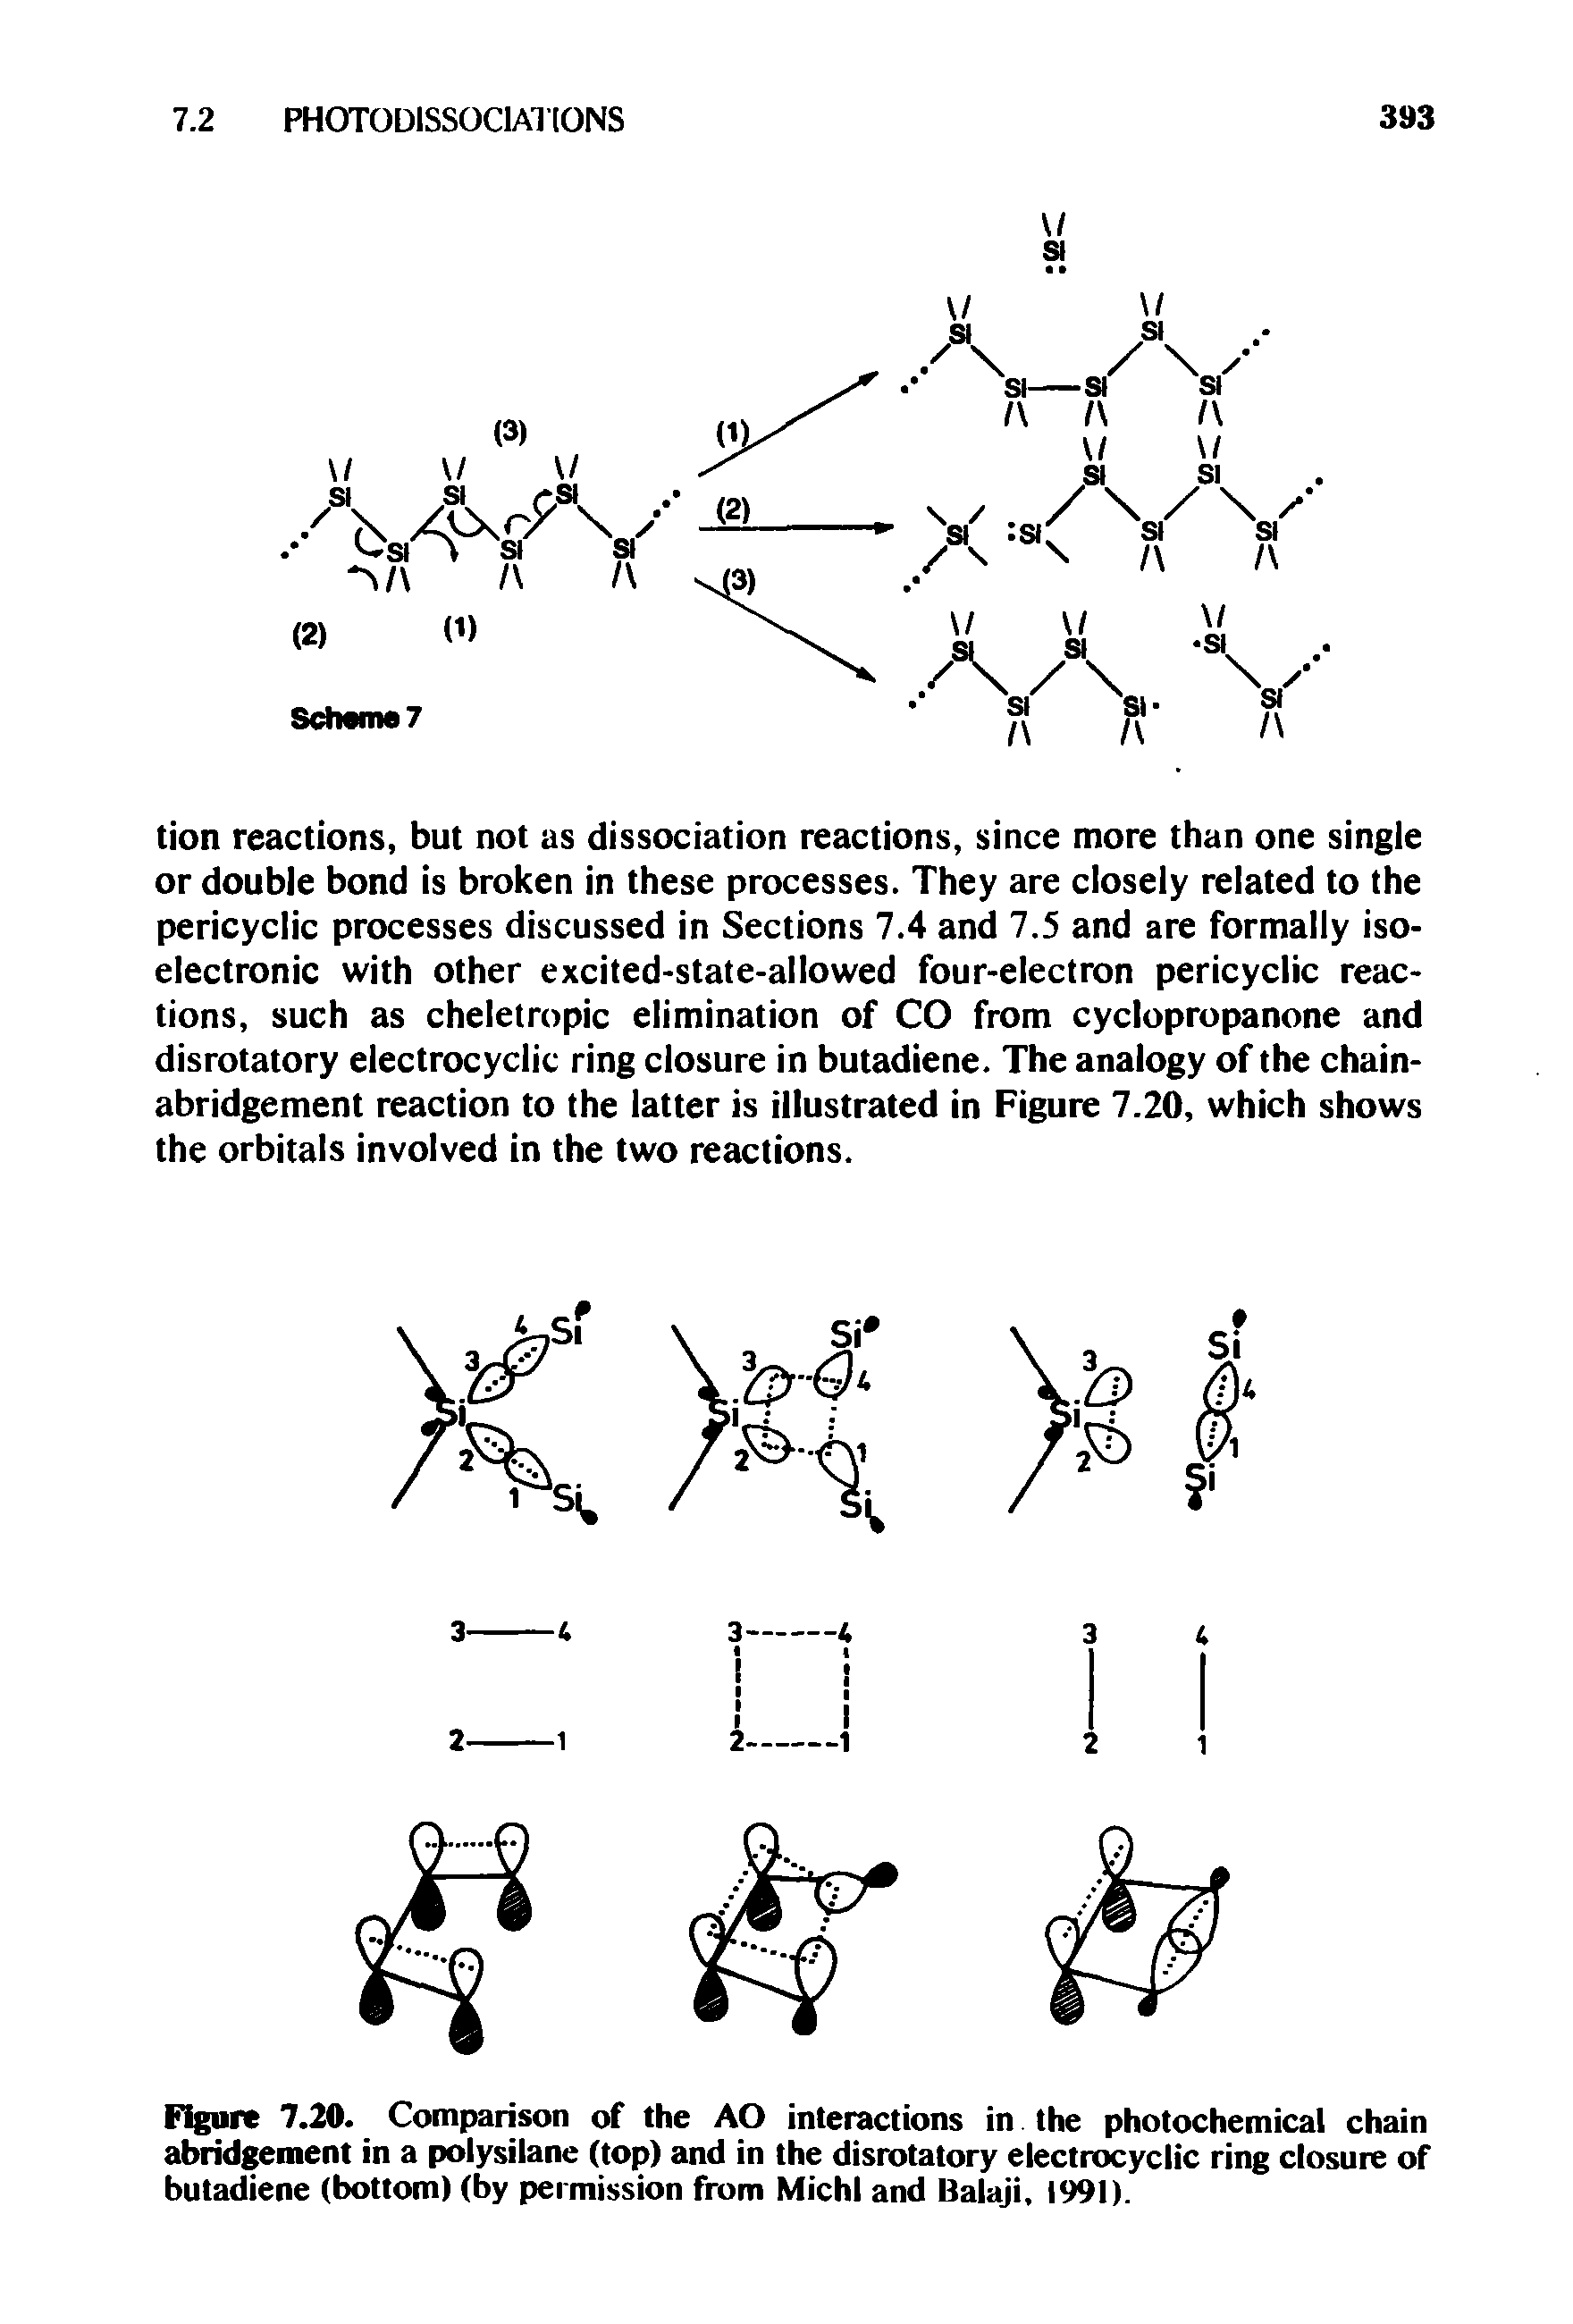 Figure 7.20. Comparison of the AO interactions in the photochemical chain abridgement in a polysilane (top) and in the disrotatory eiectrocyciic ring closure of butadiene (bottom) (by permission from Michl and Balaji, 1991).